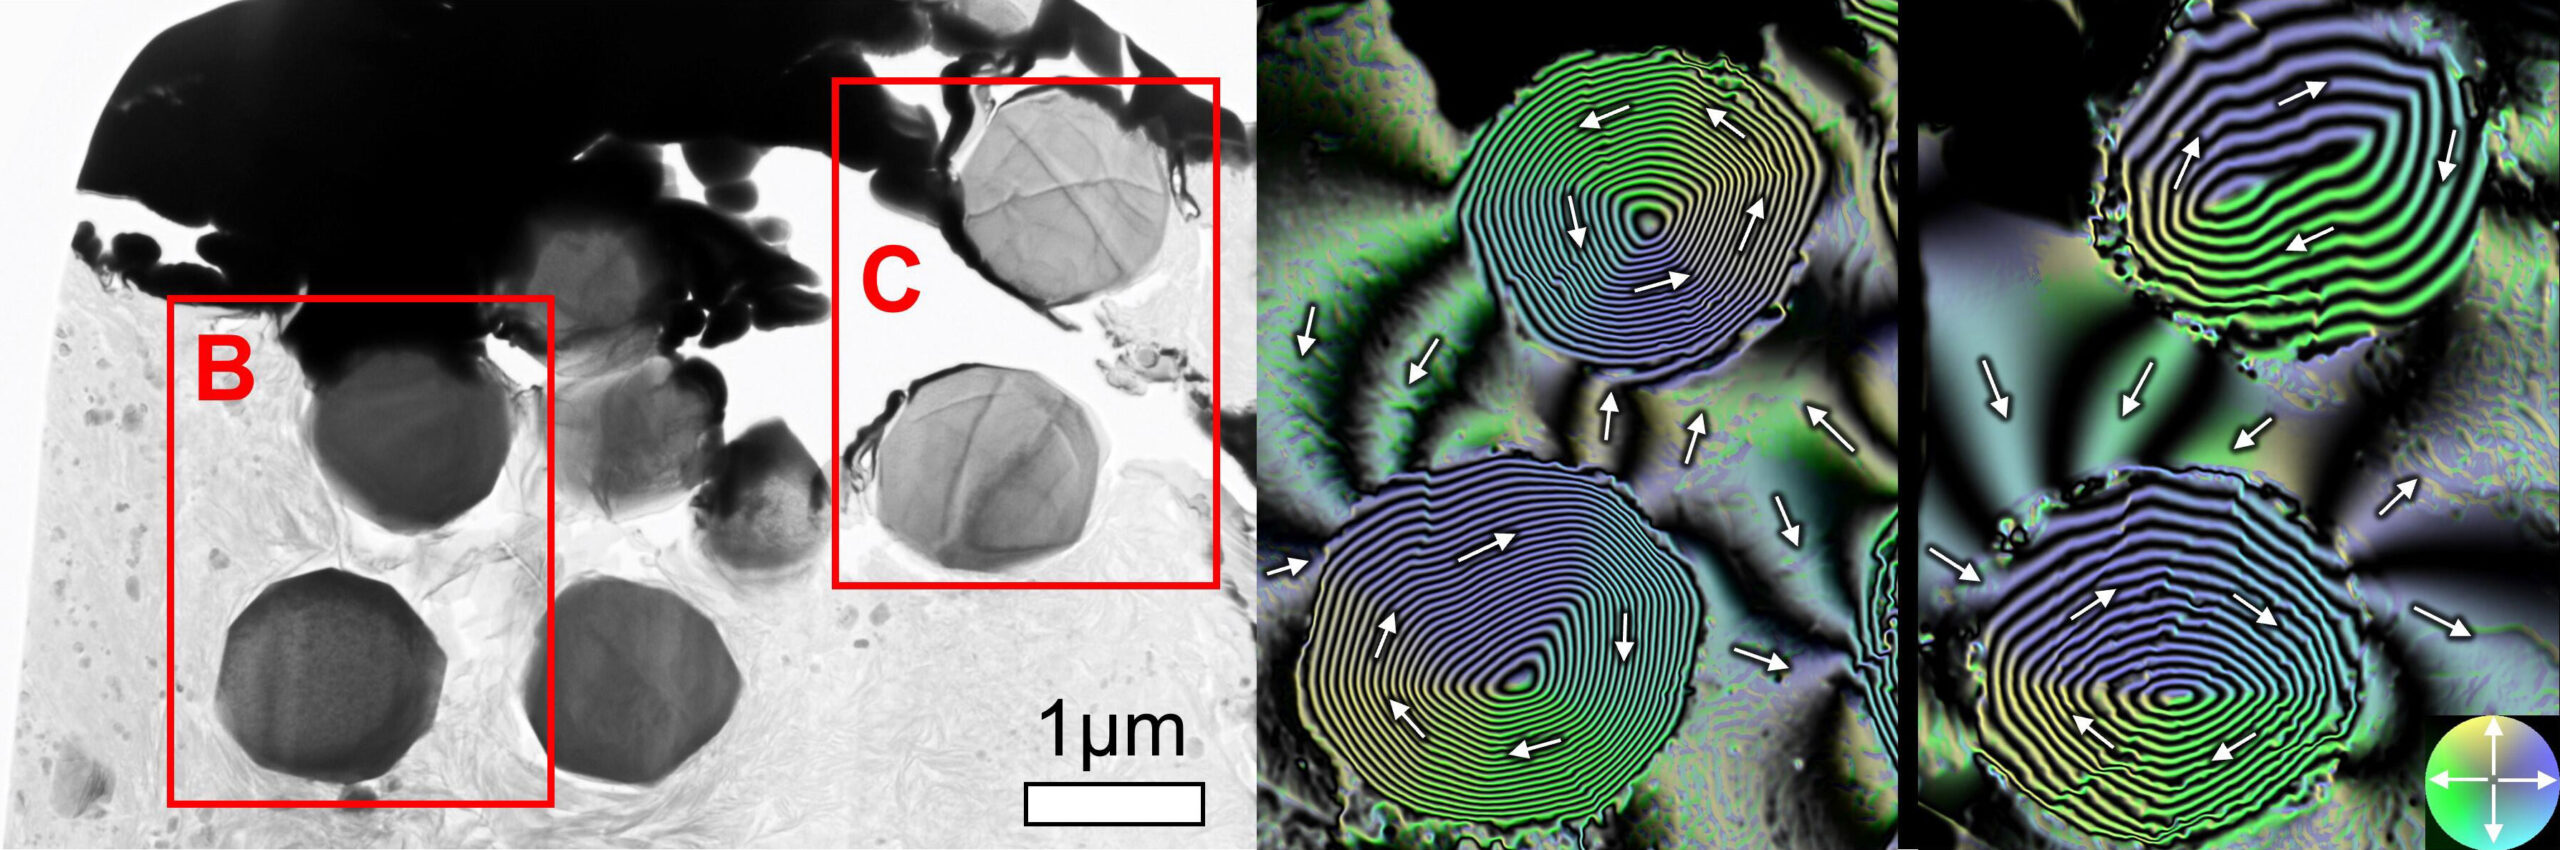 Paleomagnetic records inscribed in spherical magnetite (Fe3O4) crystals. Transmission electron microscopy images (A) of magnetite extracted from Ryugu samples and magnetic flux distribution images (B, C) obtained by electron holography. Arrows and colors indicate magnetization direction. The concentric stripes seen inside the particles indicate that the magnetic field lines are entwined in the direction of the arrows (called a helical domain structure). The magnetic field lines seen outside the particle are stray magnetic fields from the particle, reflecting the magnetic environment of the Ryukyu when the interior of the Ryukyu parent body warmed and reactions between water and minerals occurred